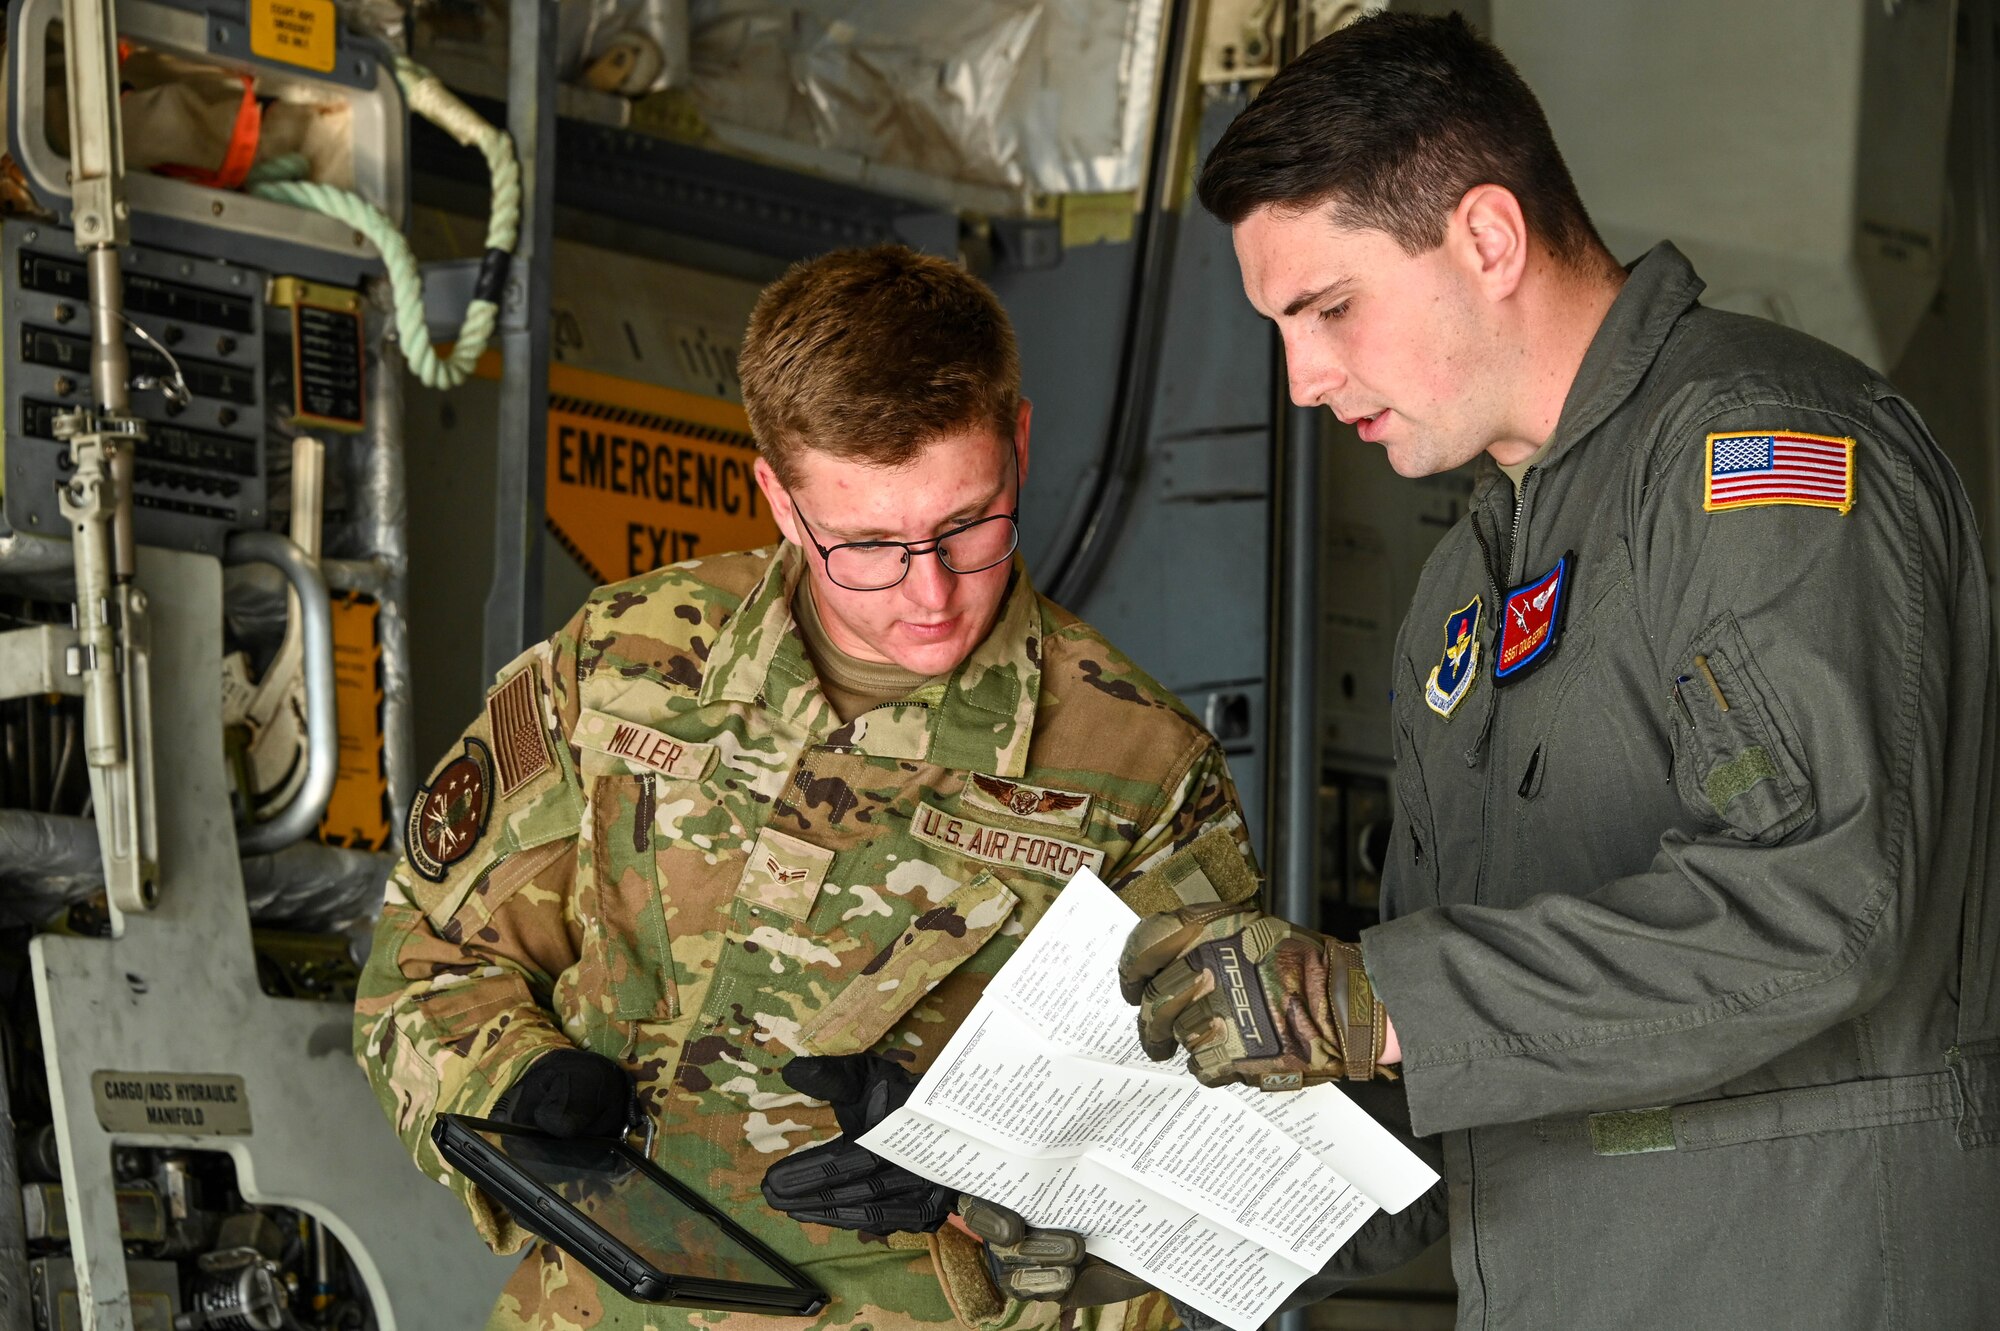 U.S. Air Force Staff Sgt. Douglas Gerrity (right), 58th Airlift Squadron loadmaster instructor, trains Airman 1st Class Donald Miller (left), 97th Training Squadron student, on the next steps after opening the cargo door of a C-17 Globemaster III at Altus Air Force Base, Oklahoma, June 23, 2023. Gerrity recently reenlisted for four more years in the Air Force to continue his education in health science. (U.S. Air Force photo by Senior Airman Kayla Christenson)